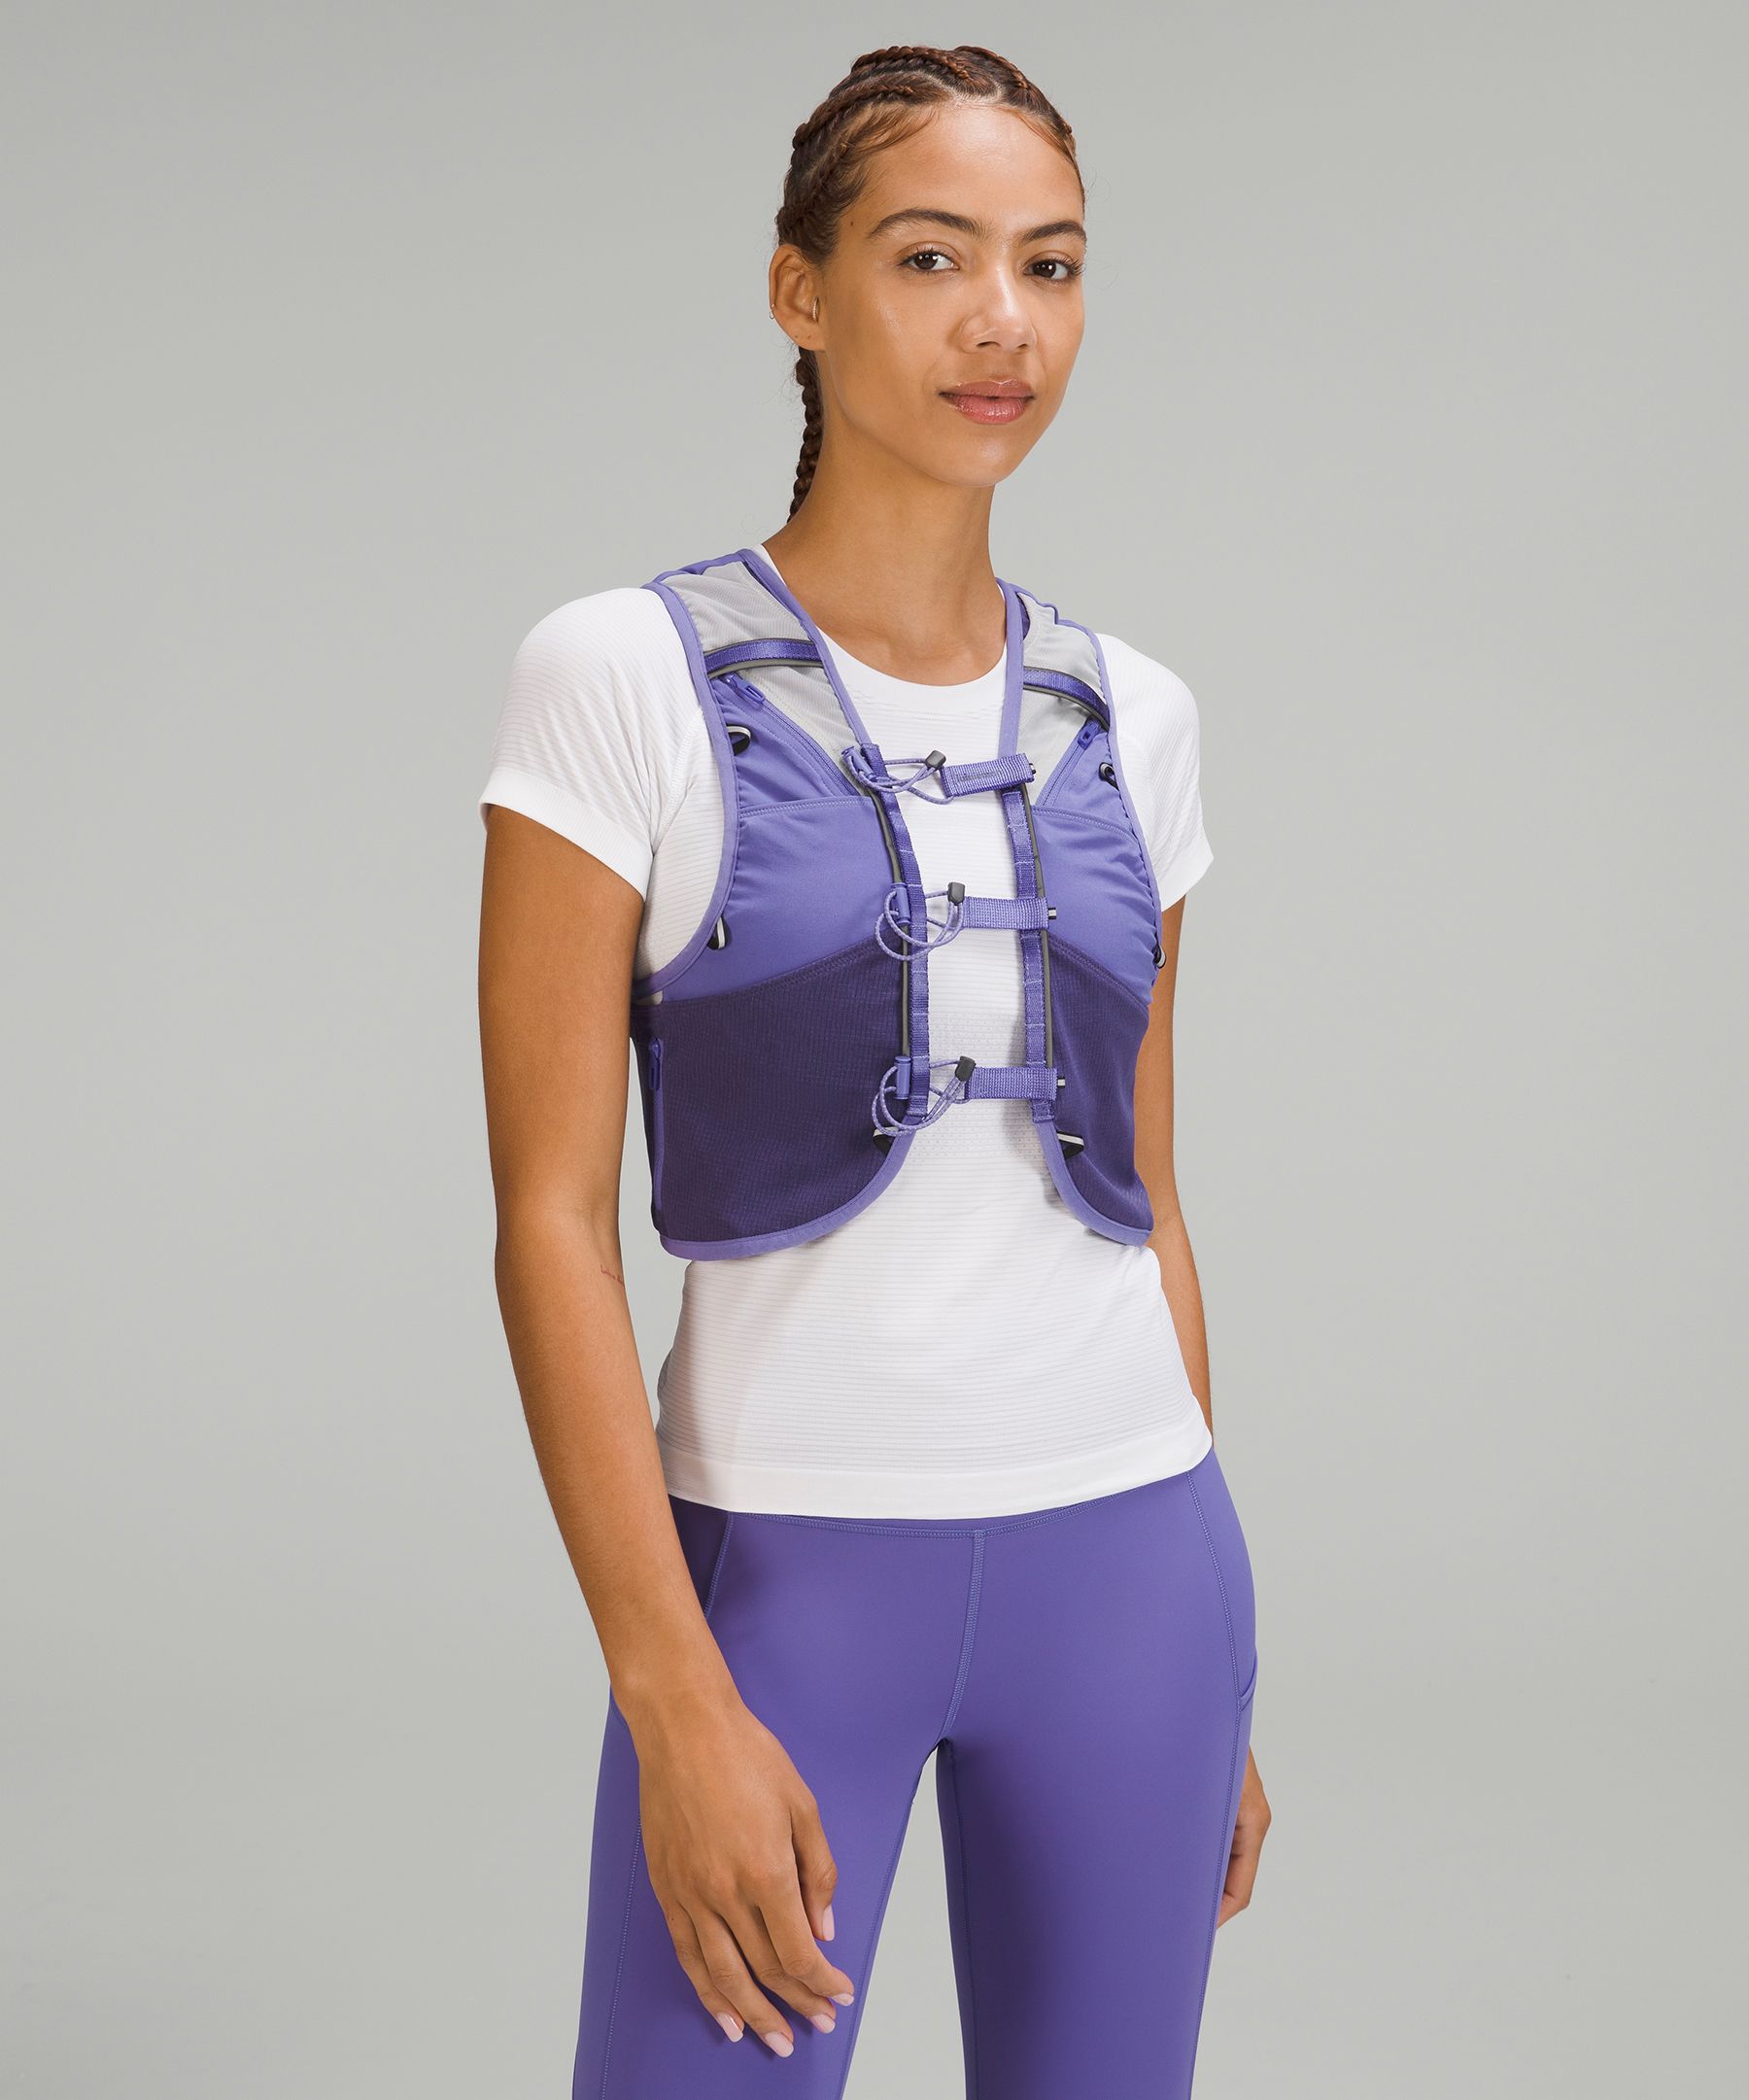 Lululemon Just Launched a Running Hydration Vest